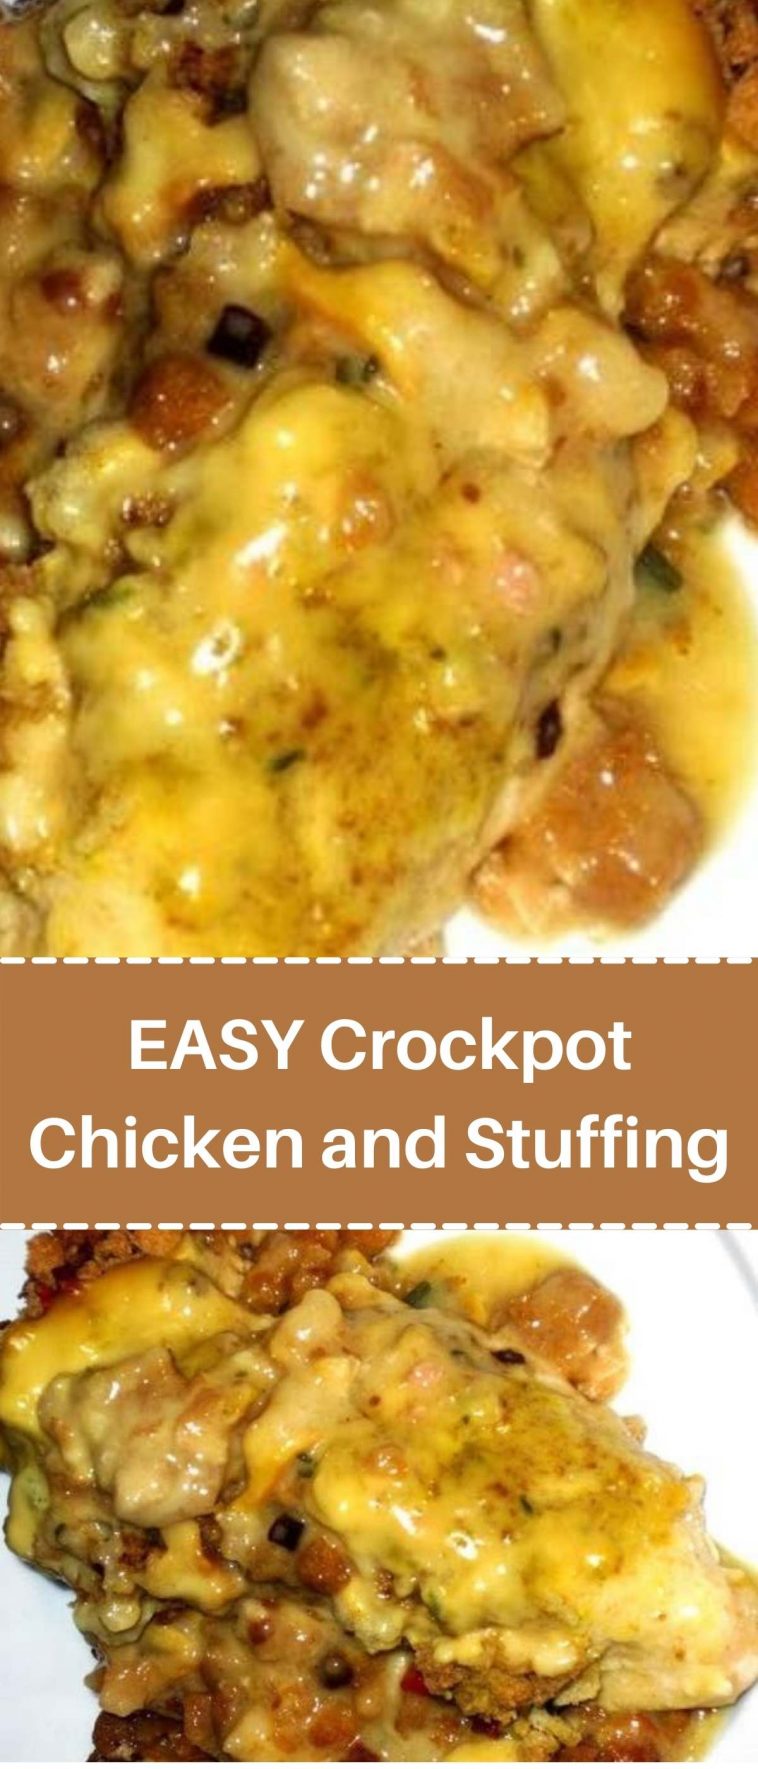 EASY Crockpot Chicken and Stuffing